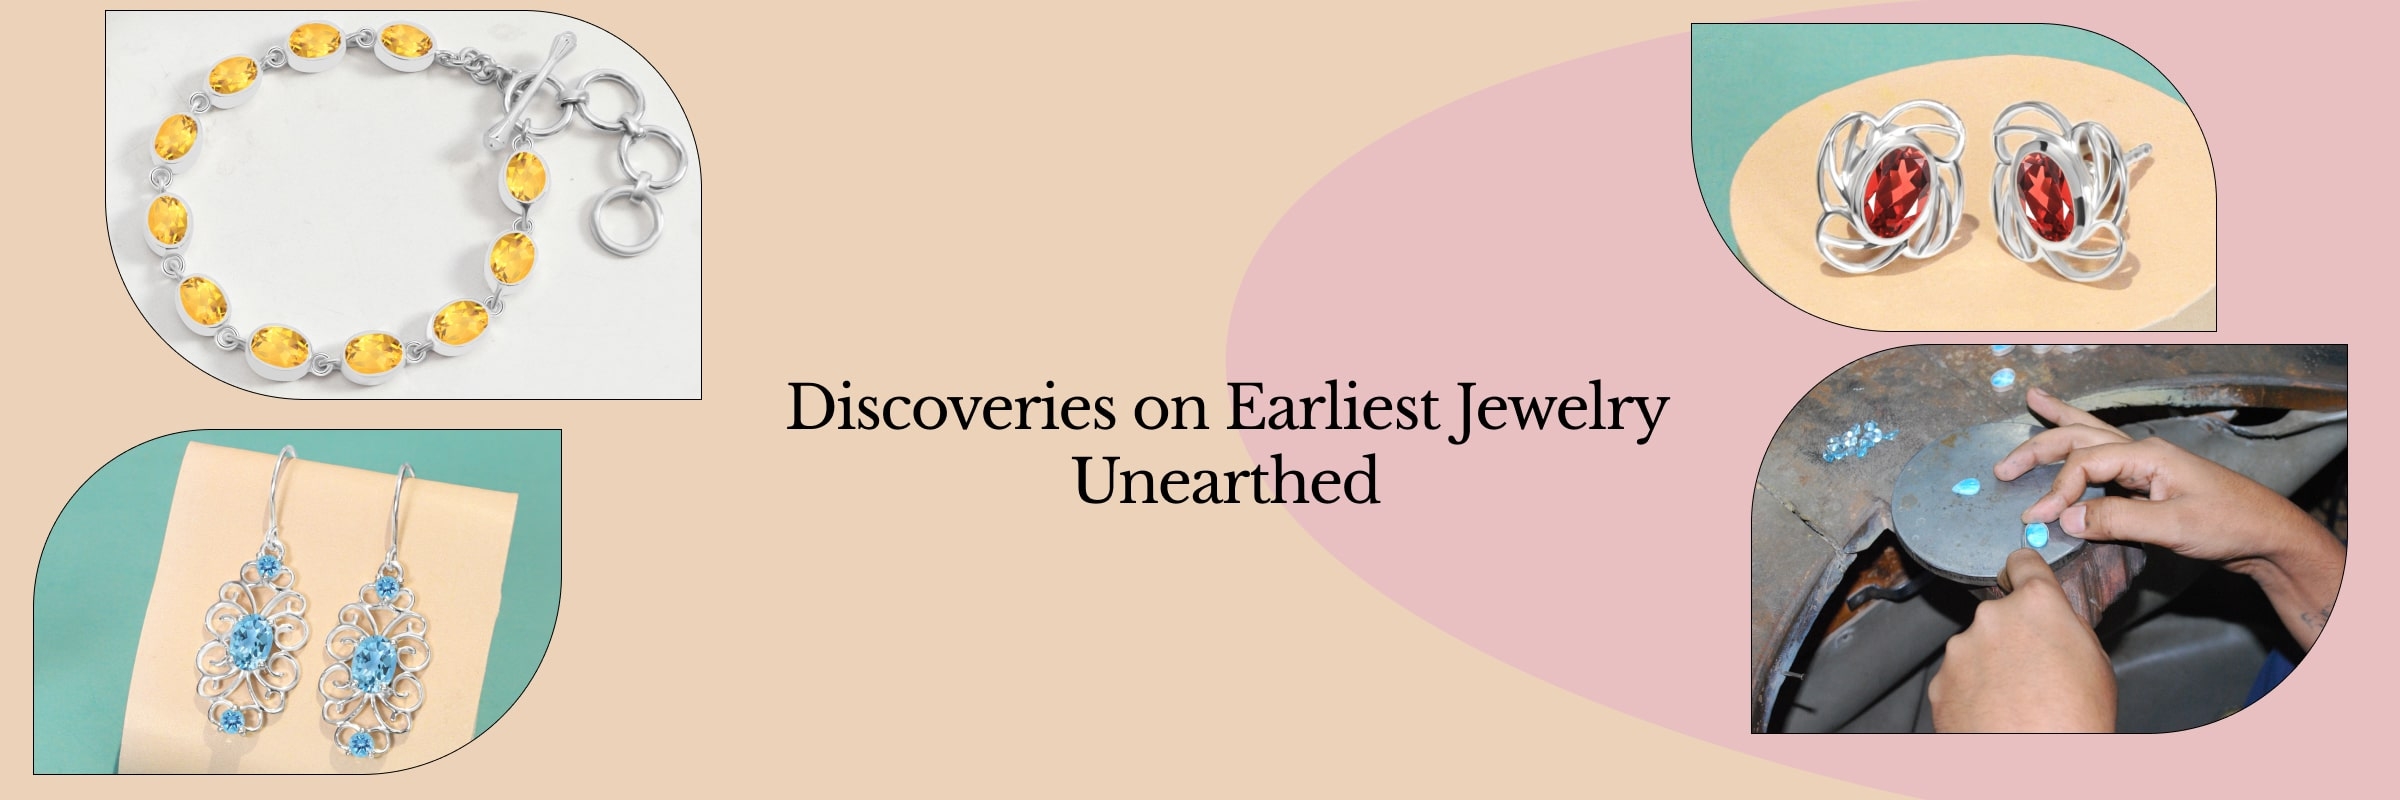 What Was Discovered Regarding the Earliest Jewelry Used?